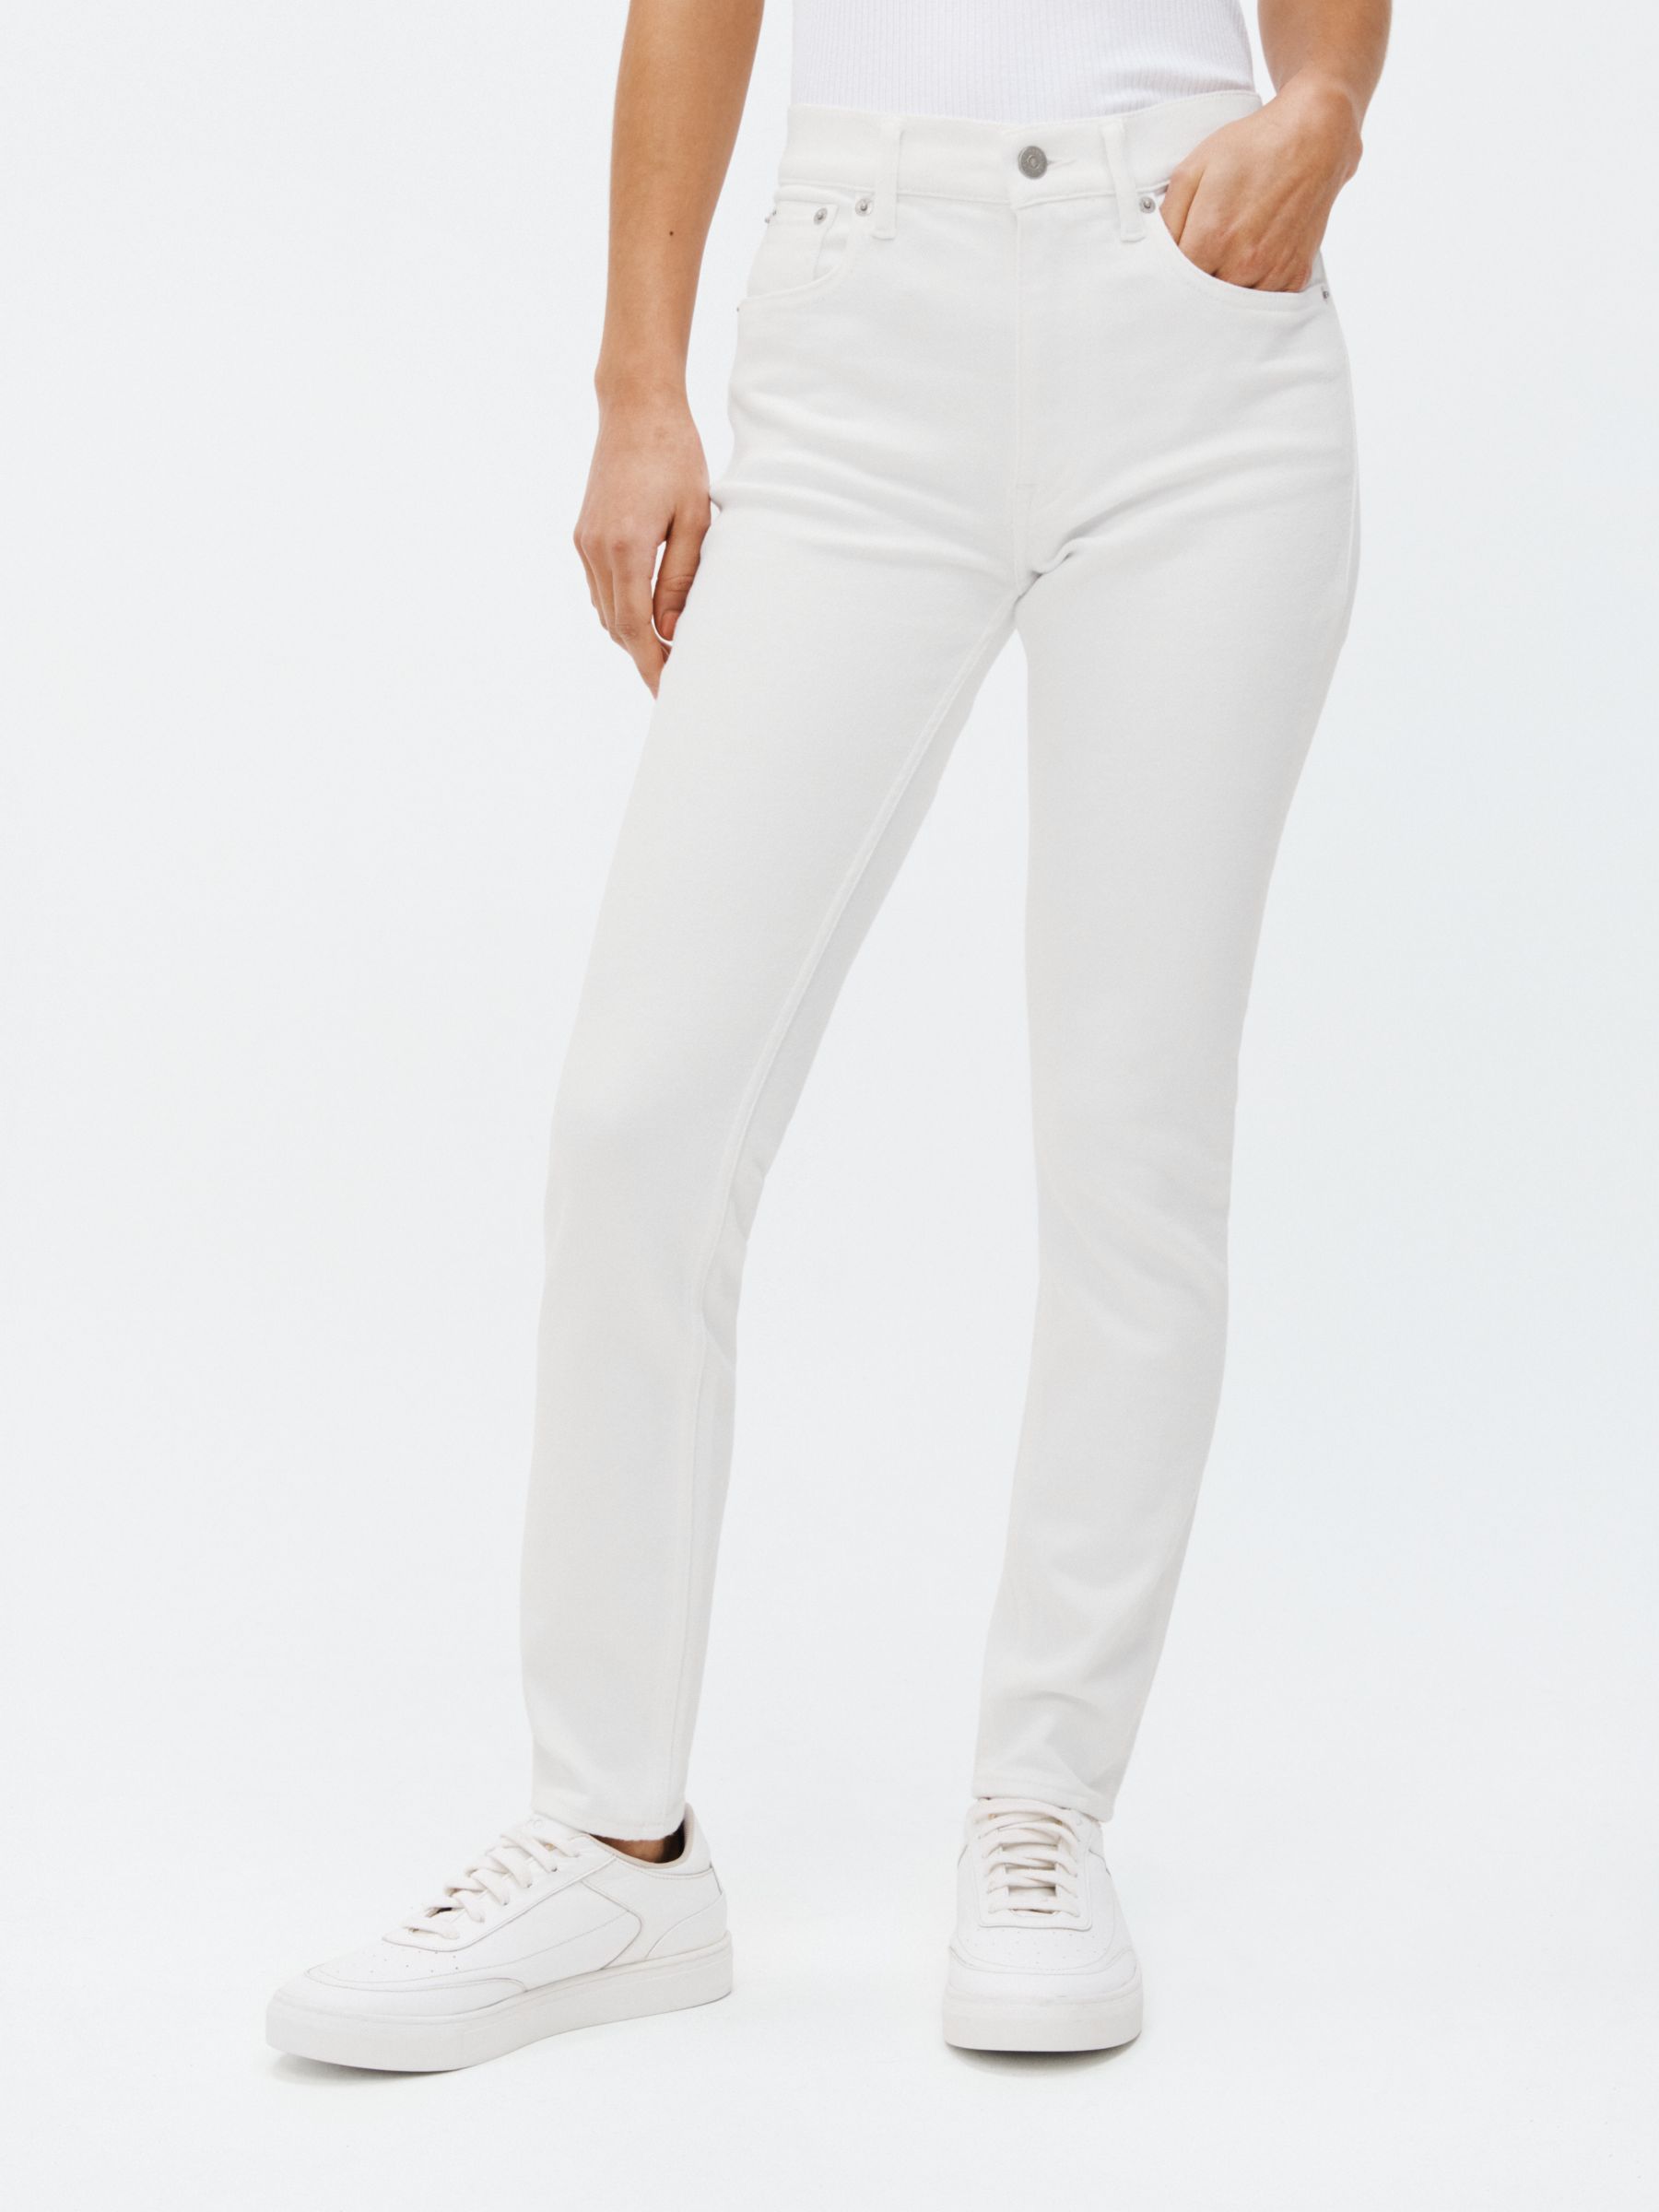 Polo Ralph Lauren Mid Rise Skinny Jeans, Amesbury Wash, 26